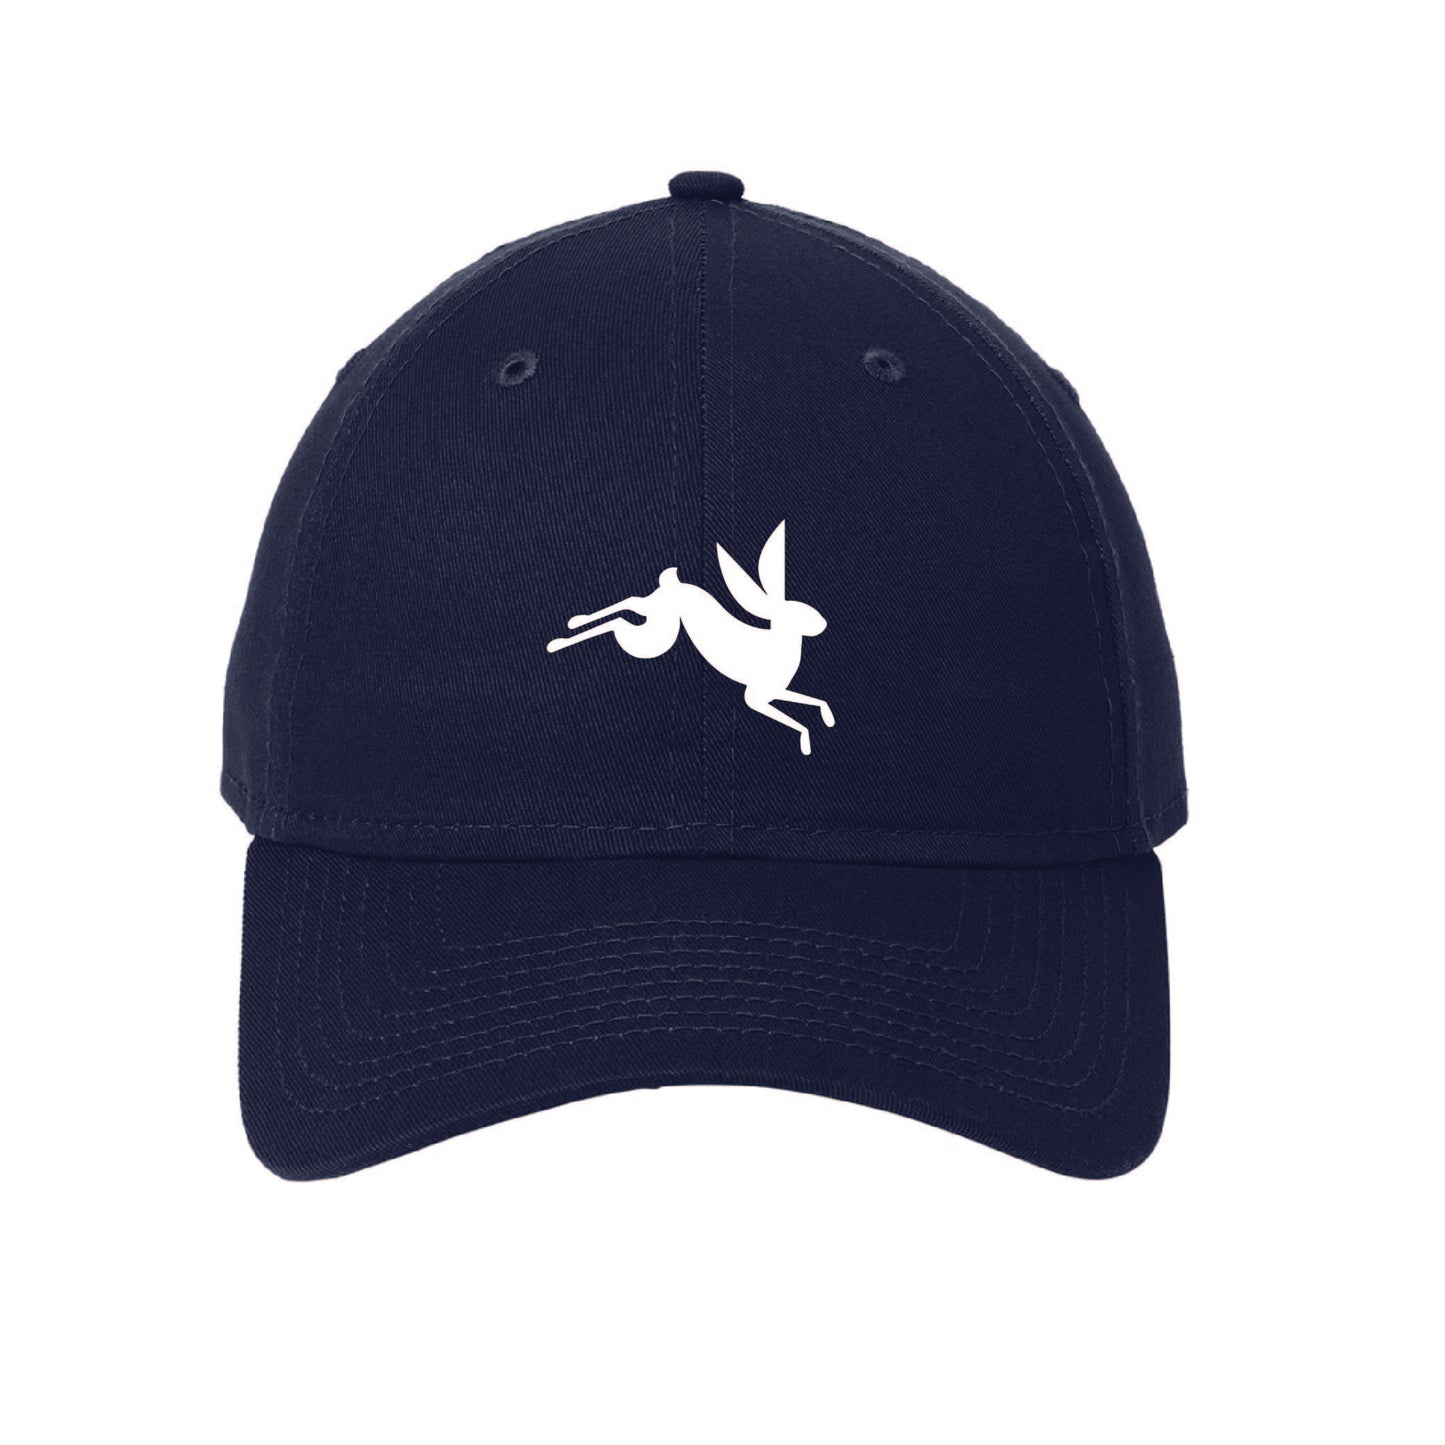 The Ford Bunny Unstructured Cap